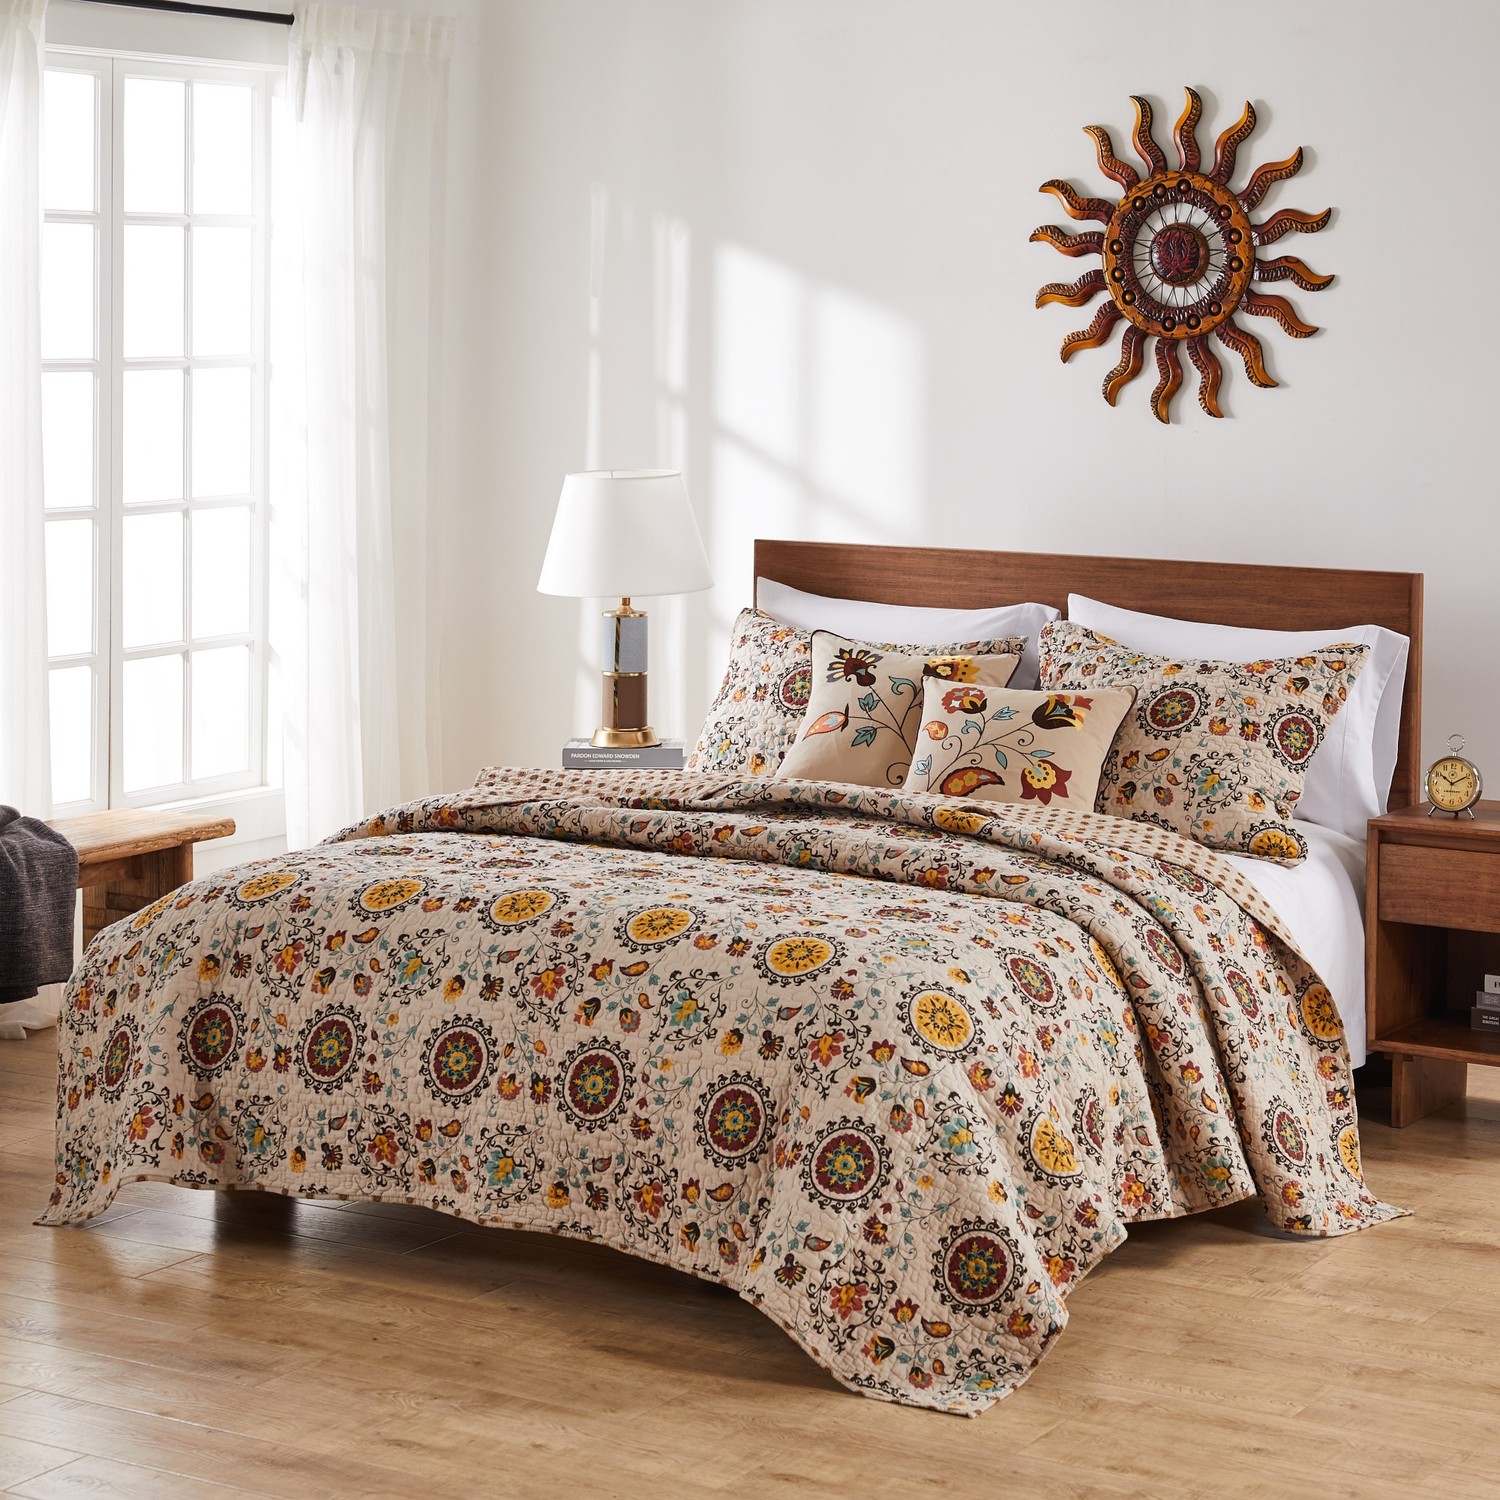 Greenland Home Fashions Bonus Set Quilts-Bedspreads and Coverlets Multi